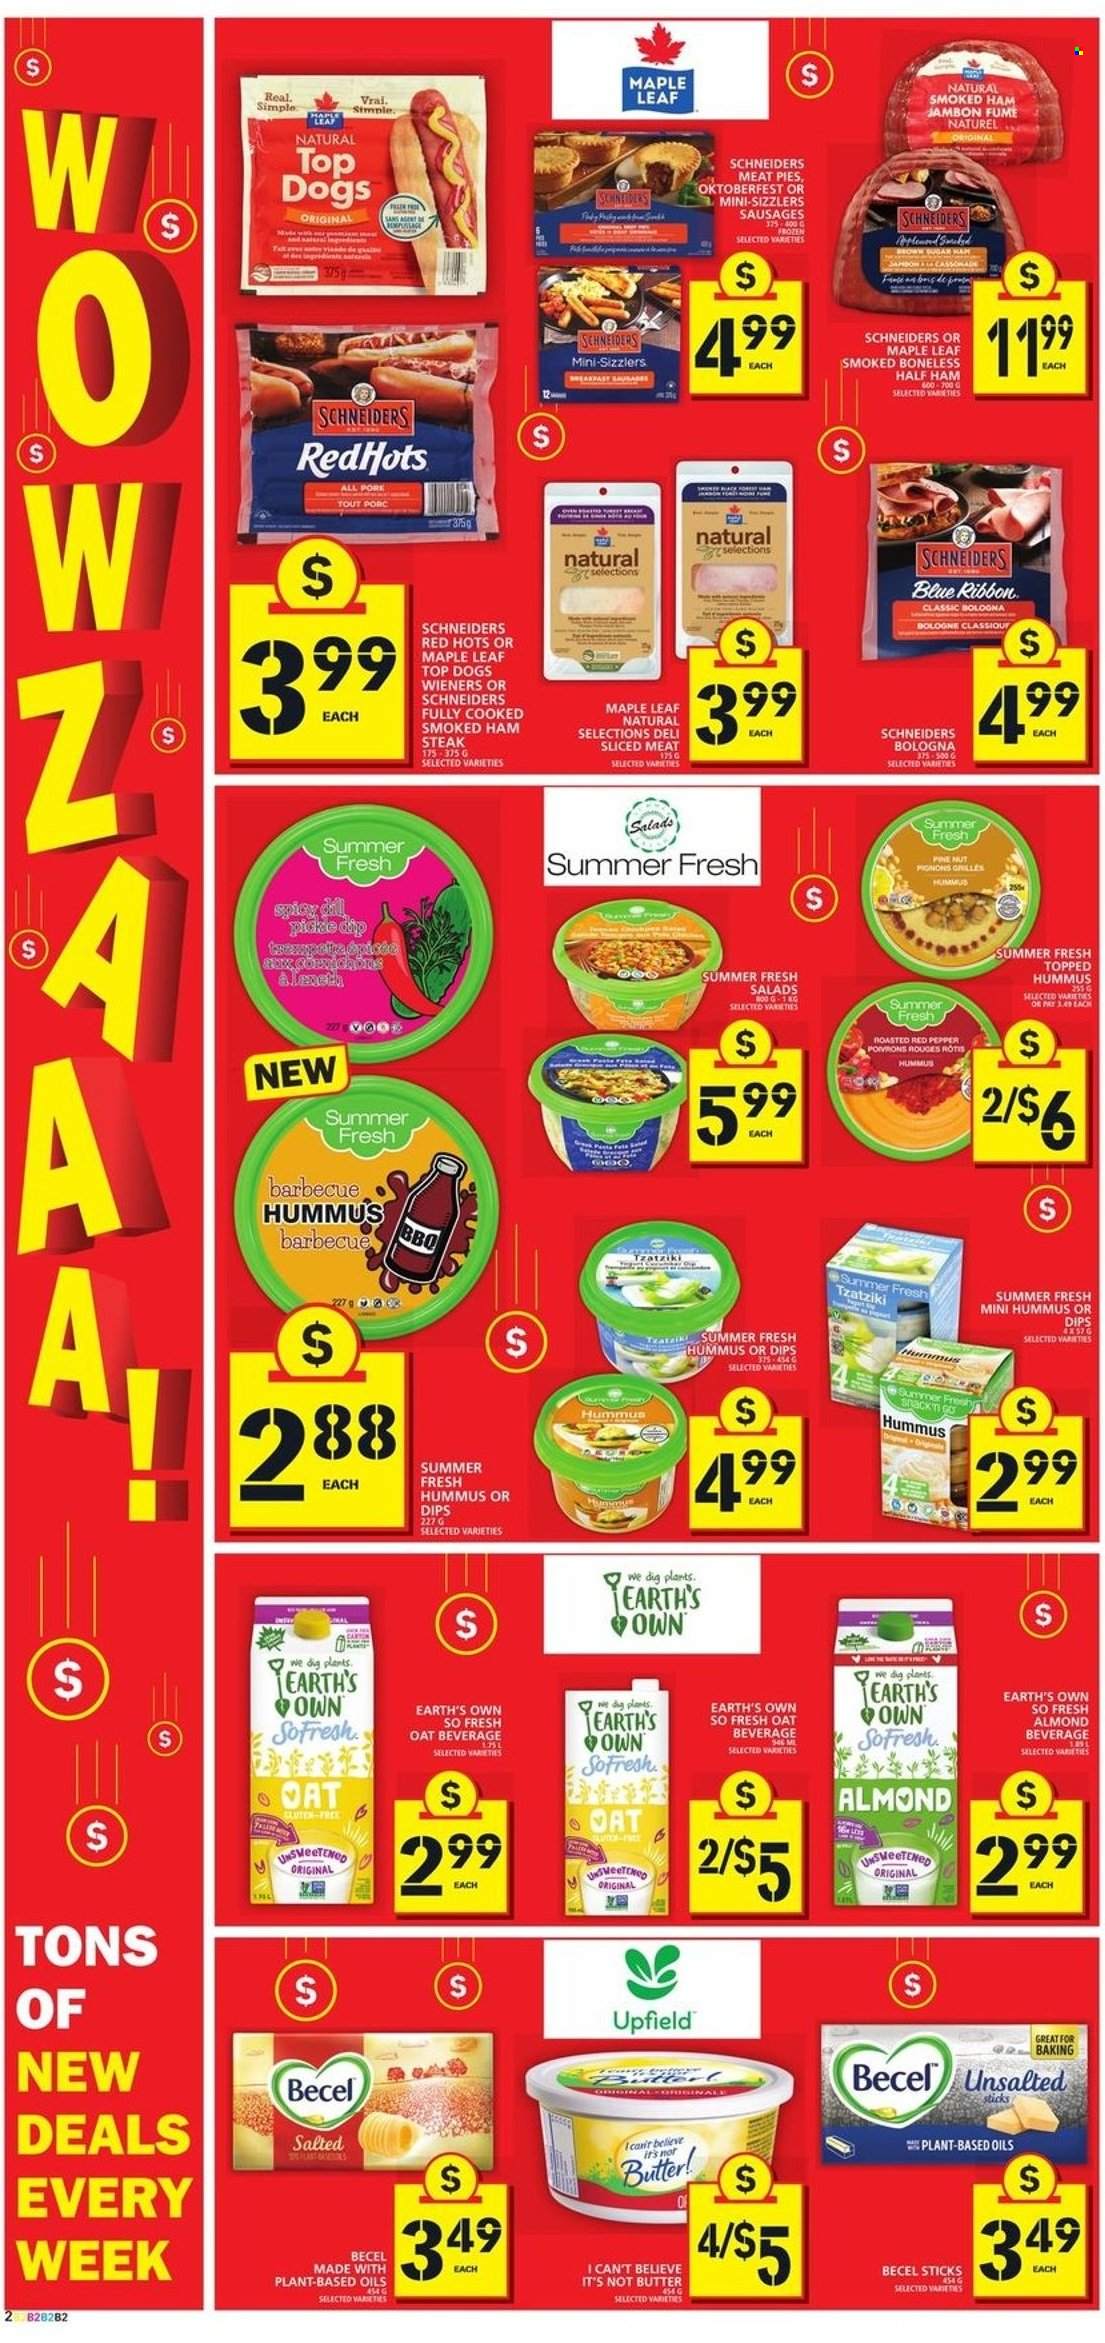 thumbnail - Food Basics Flyer - January 13, 2022 - January 19, 2022 - Sales products - Blue Ribbon, half ham, ham, smoked ham, bologna sausage, sausage, tzatziki, hummus, ham steaks, butter, I Can't Believe It's Not Butter, dip, snack, oats, steak. Page 2.